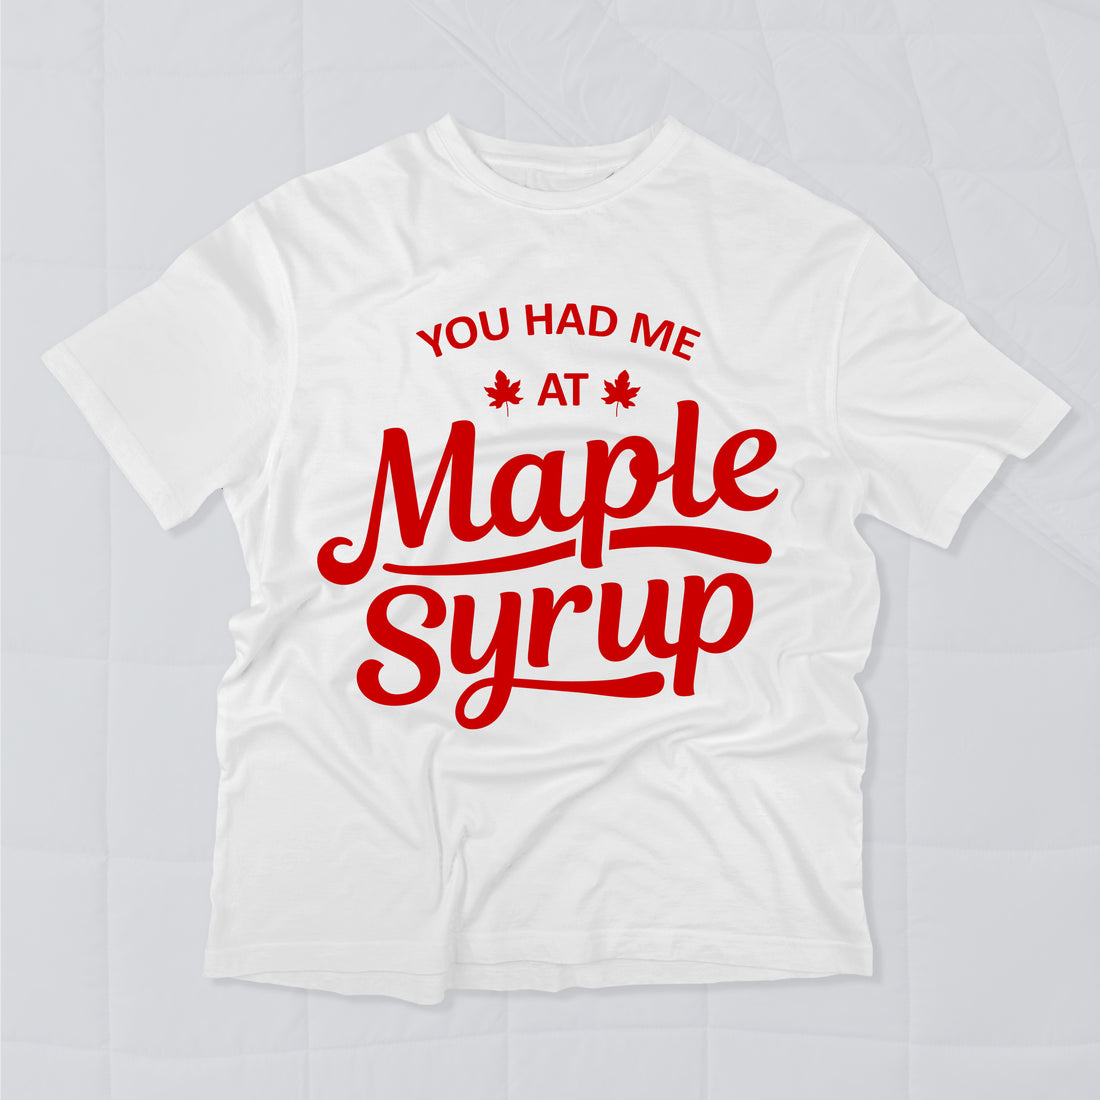 You Had Me at Maple Syrup